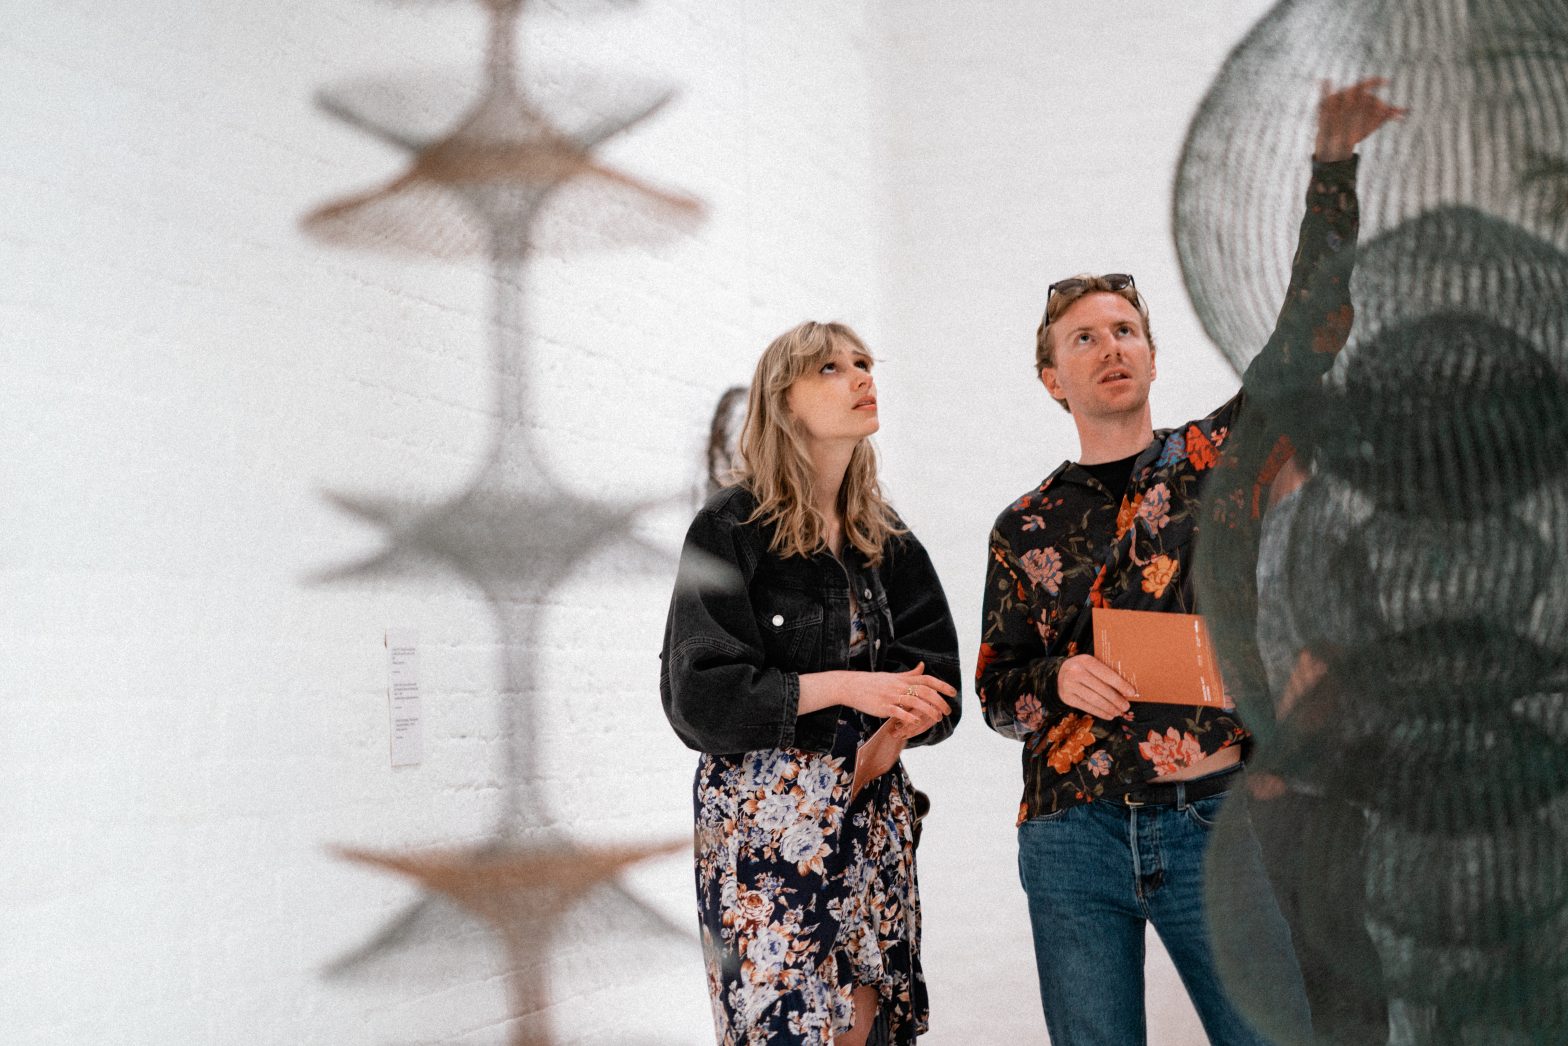 Two people standing in front of a wire hanging sculpture by Ruth Asawa. Another hanging sculpture is visible but blurred in the foreground.